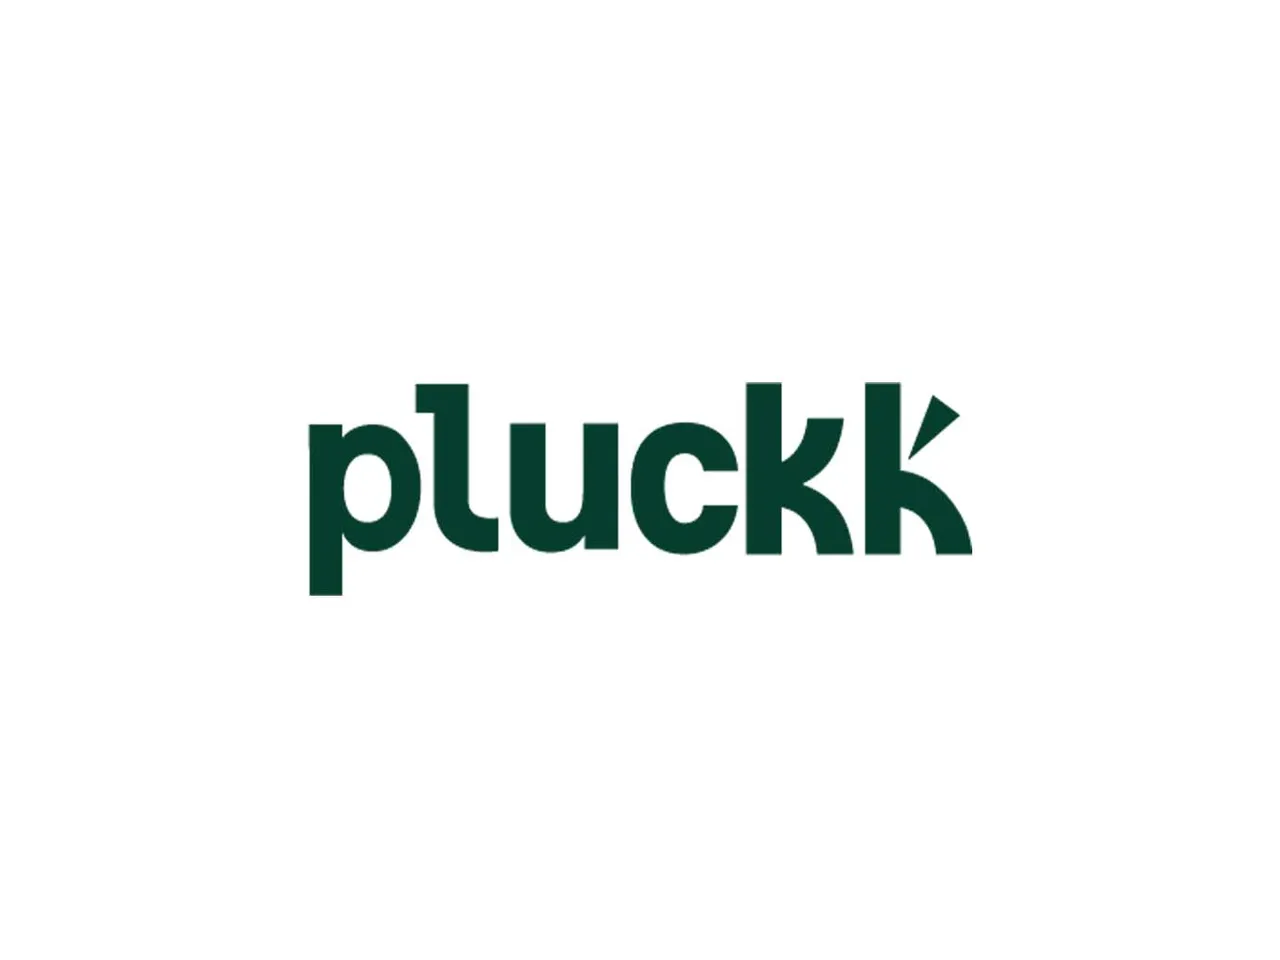 Foodtech platform Pluckk raises $5M in a Seed round led by Exponentia Ventures